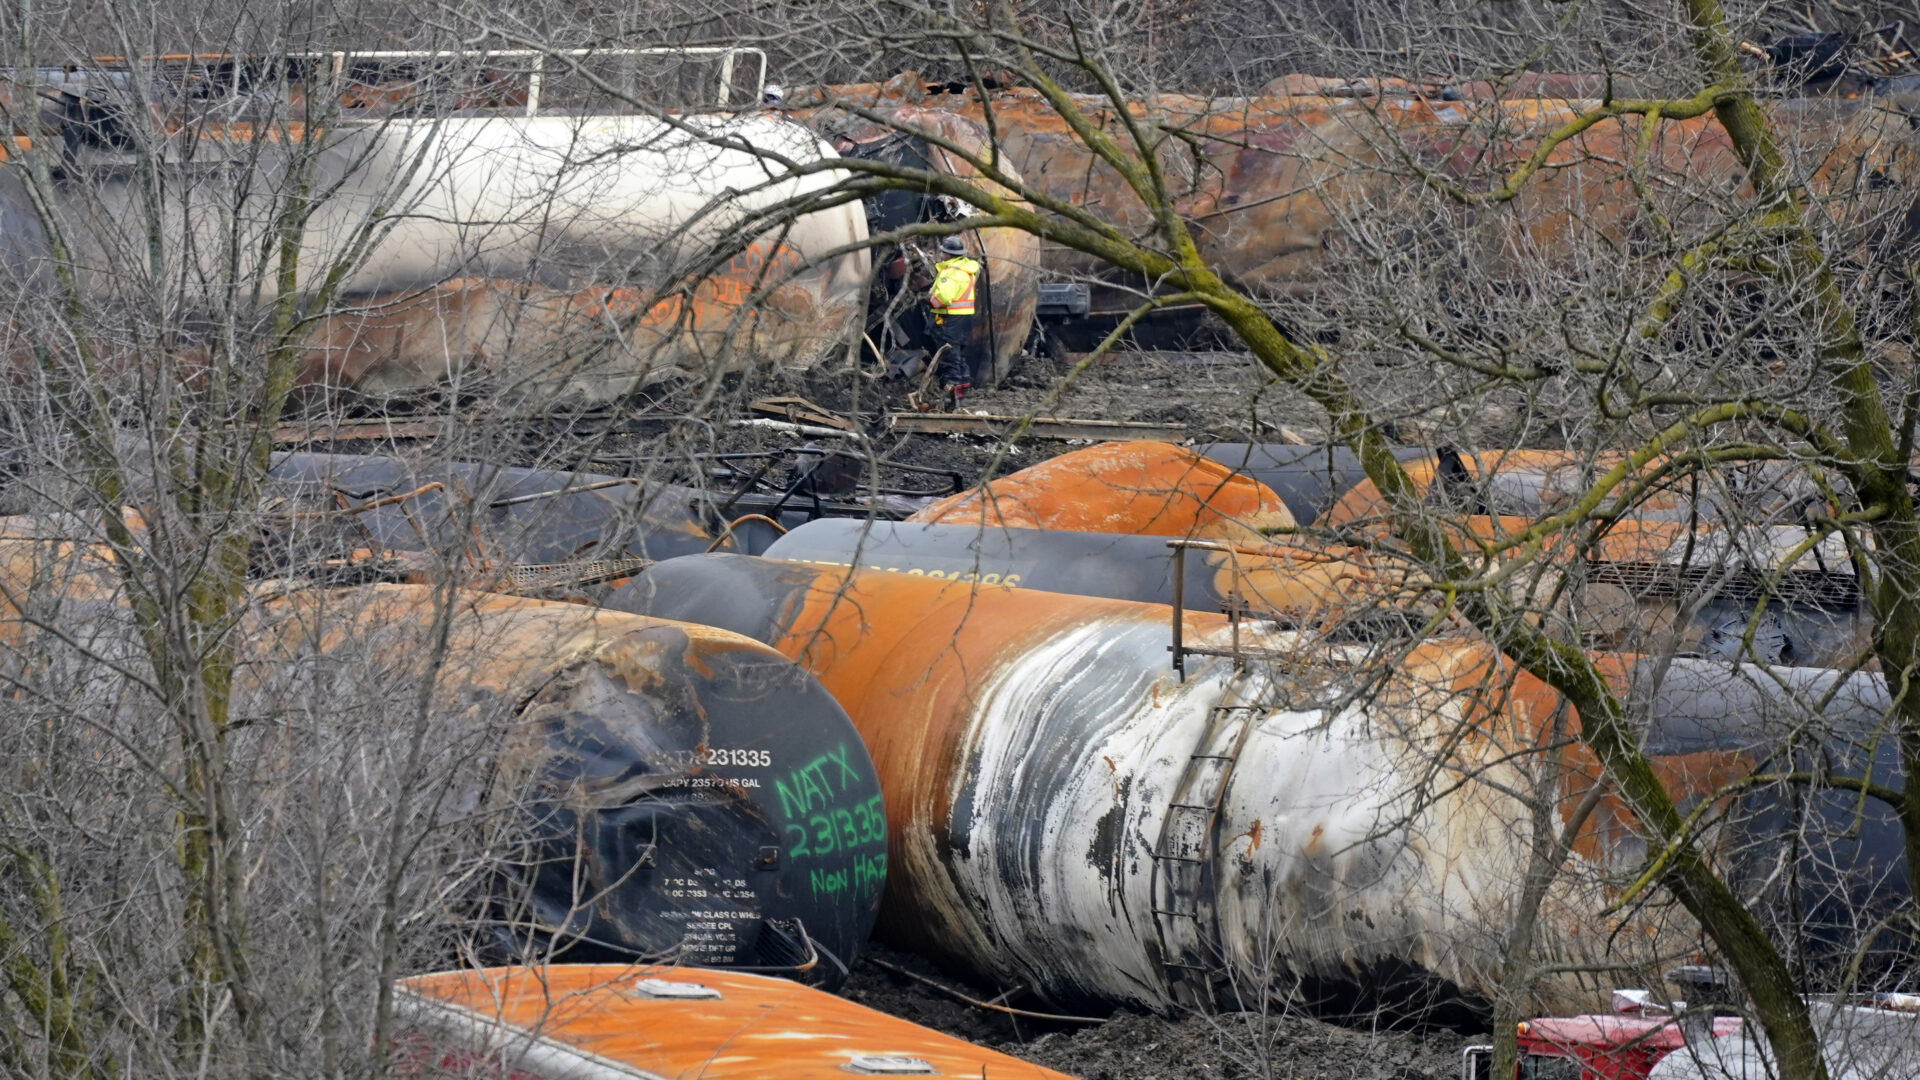 Ohio derailment aftermath: How worried should people be? | WITF